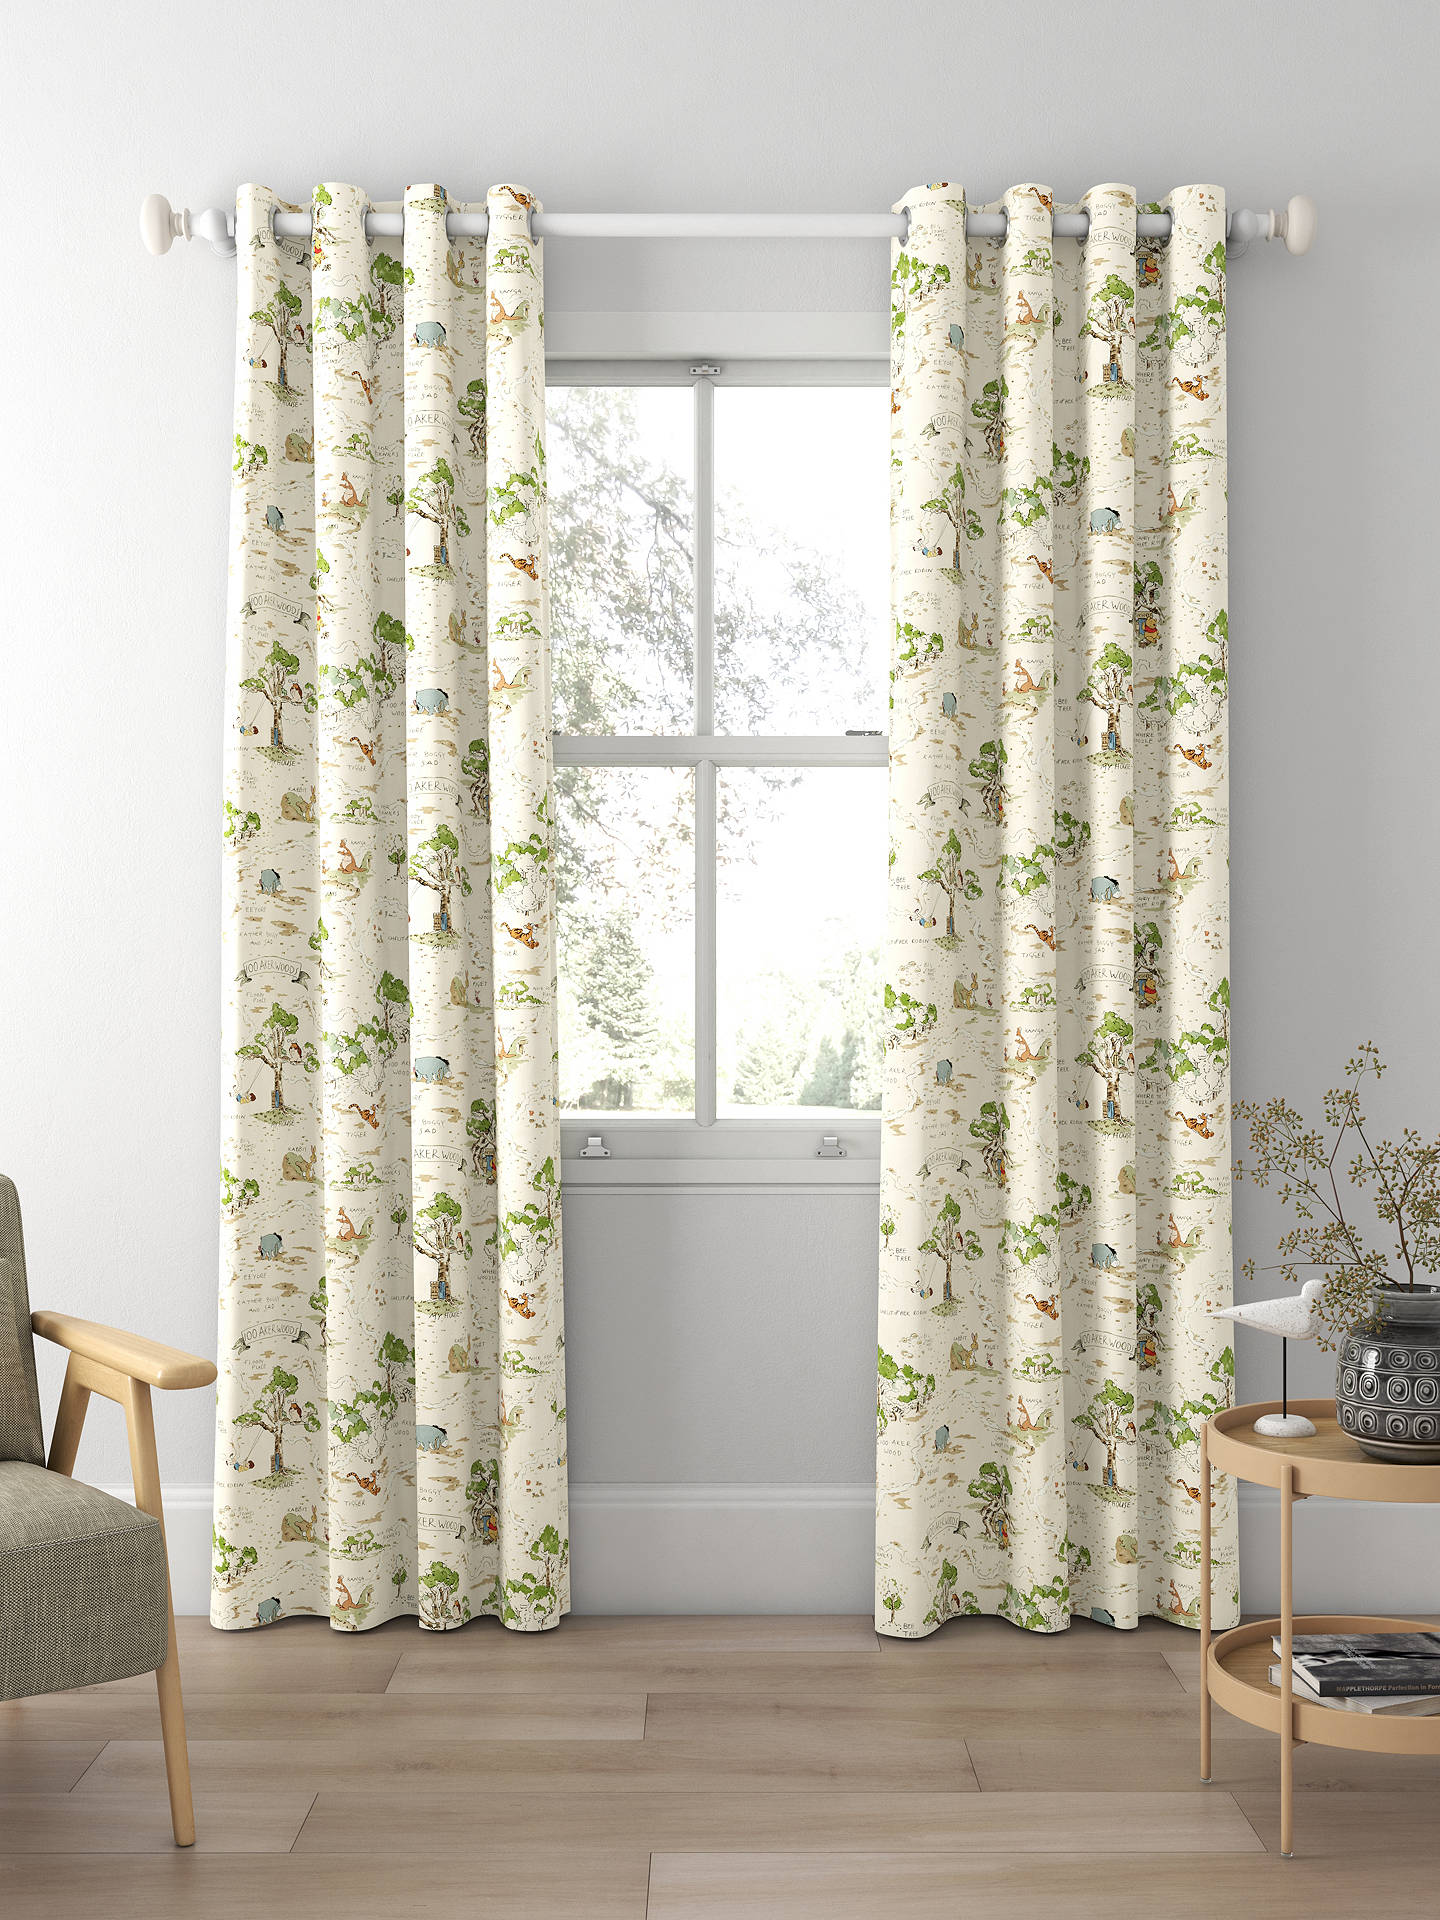 Sanderson Hundred Acre Wood Made to Measure Curtains, Cashew